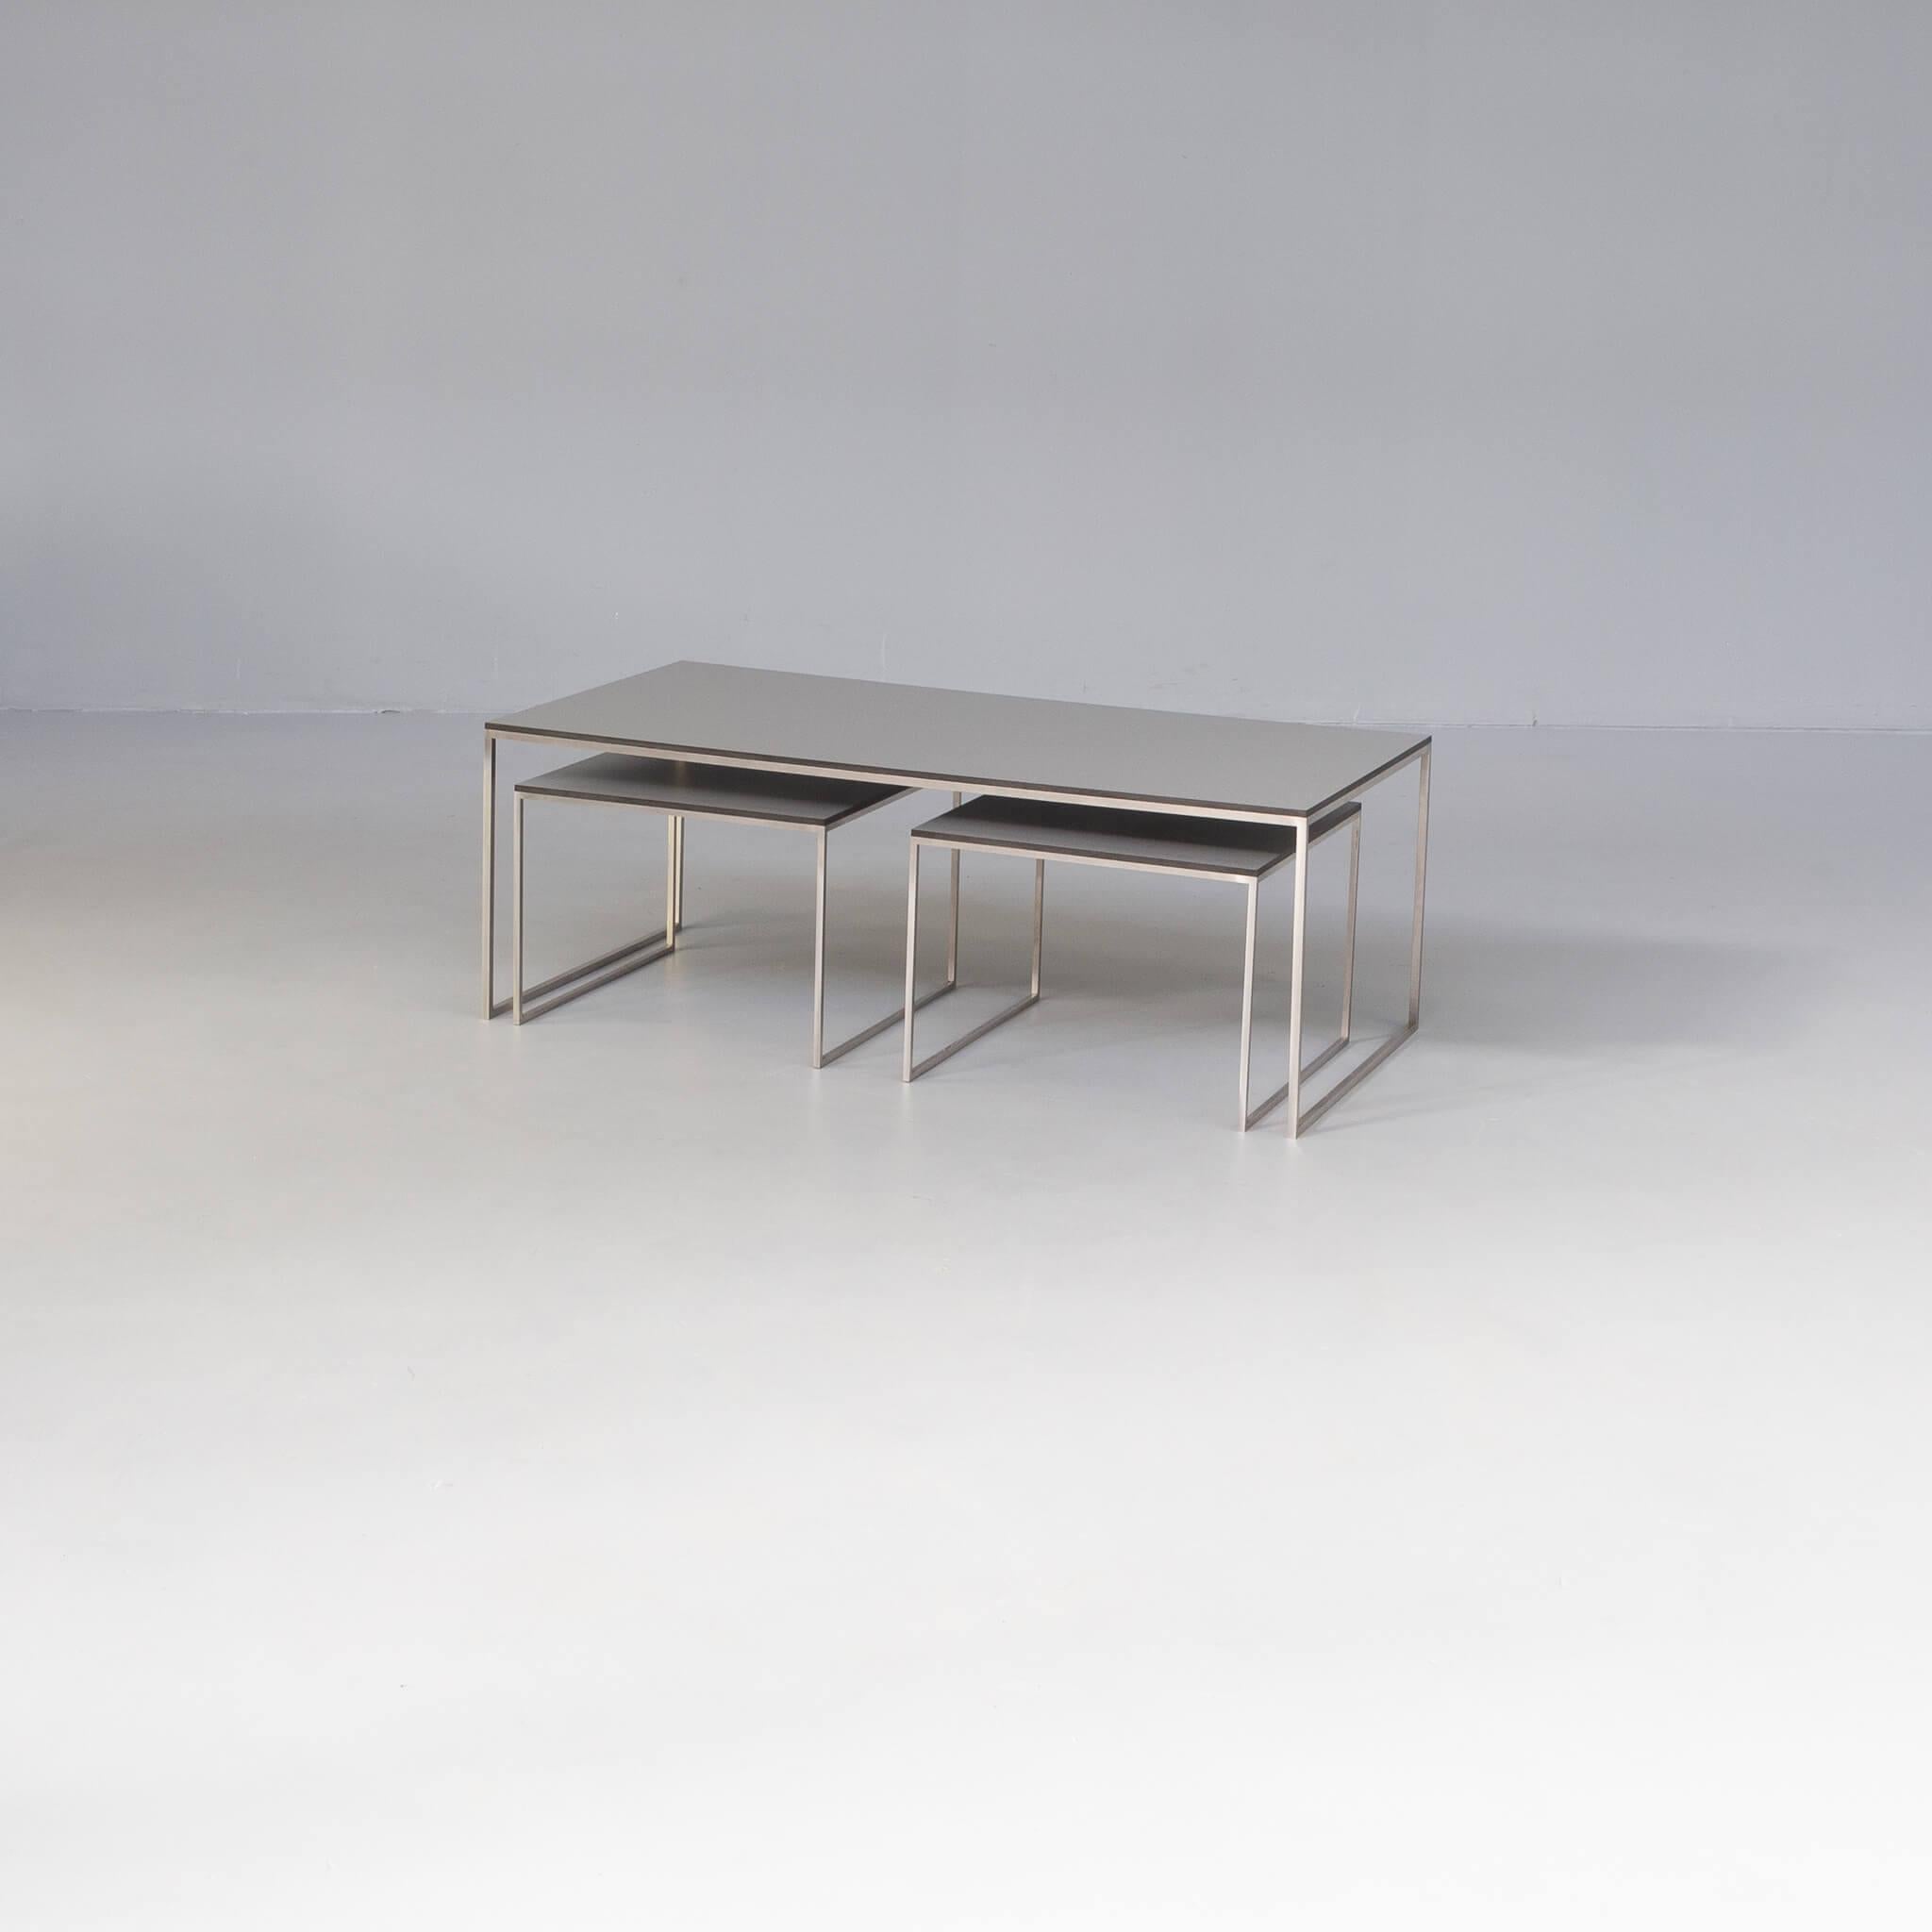 Beautiful thin lined nesting coffee table. The set of 3 tables is in 1 main large table with beautiful steel frame with unvisible welding, it looks like the frame is in 1 piece! very rare and beautiful. The two smaller tables are to be positioned